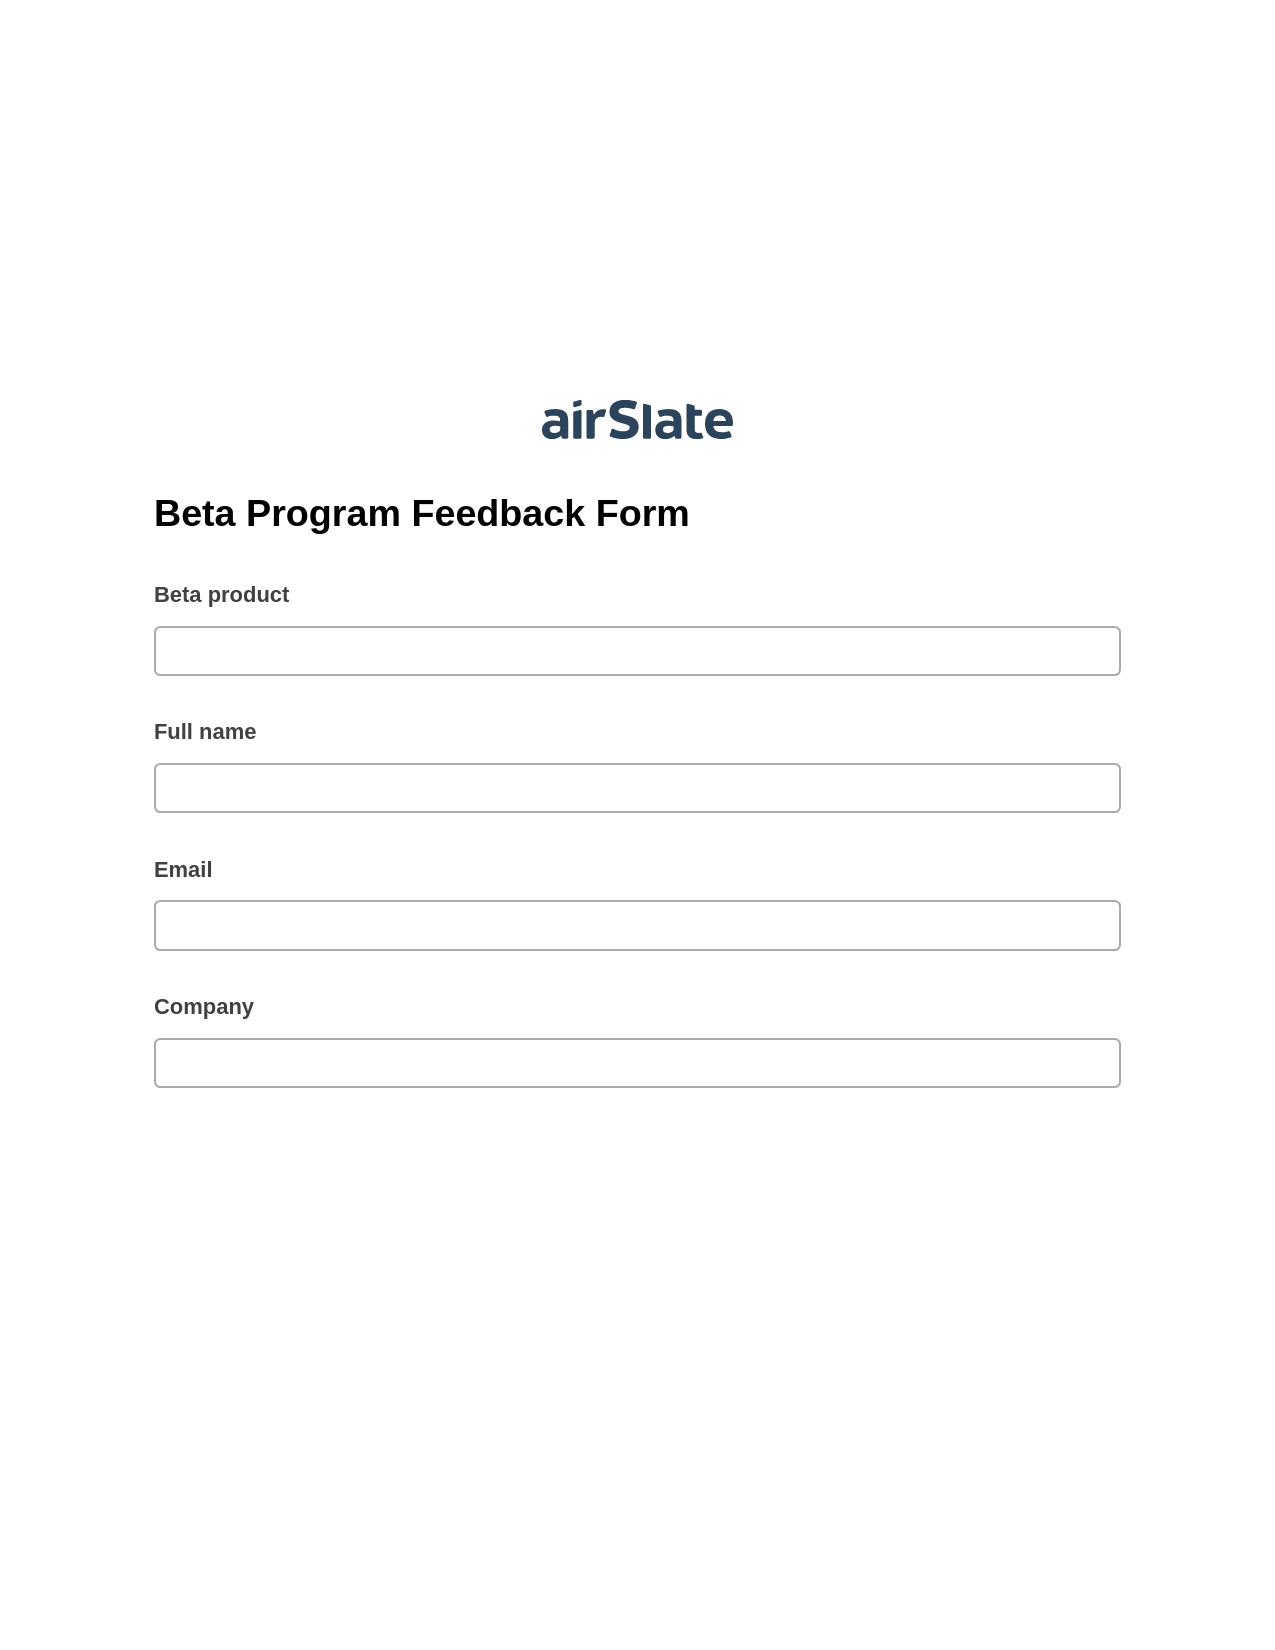 Multirole Beta Program Feedback Form Pre-fill from Salesforce Record Bot, Update Salesforce Record Bot, Archive to SharePoint Folder Bot